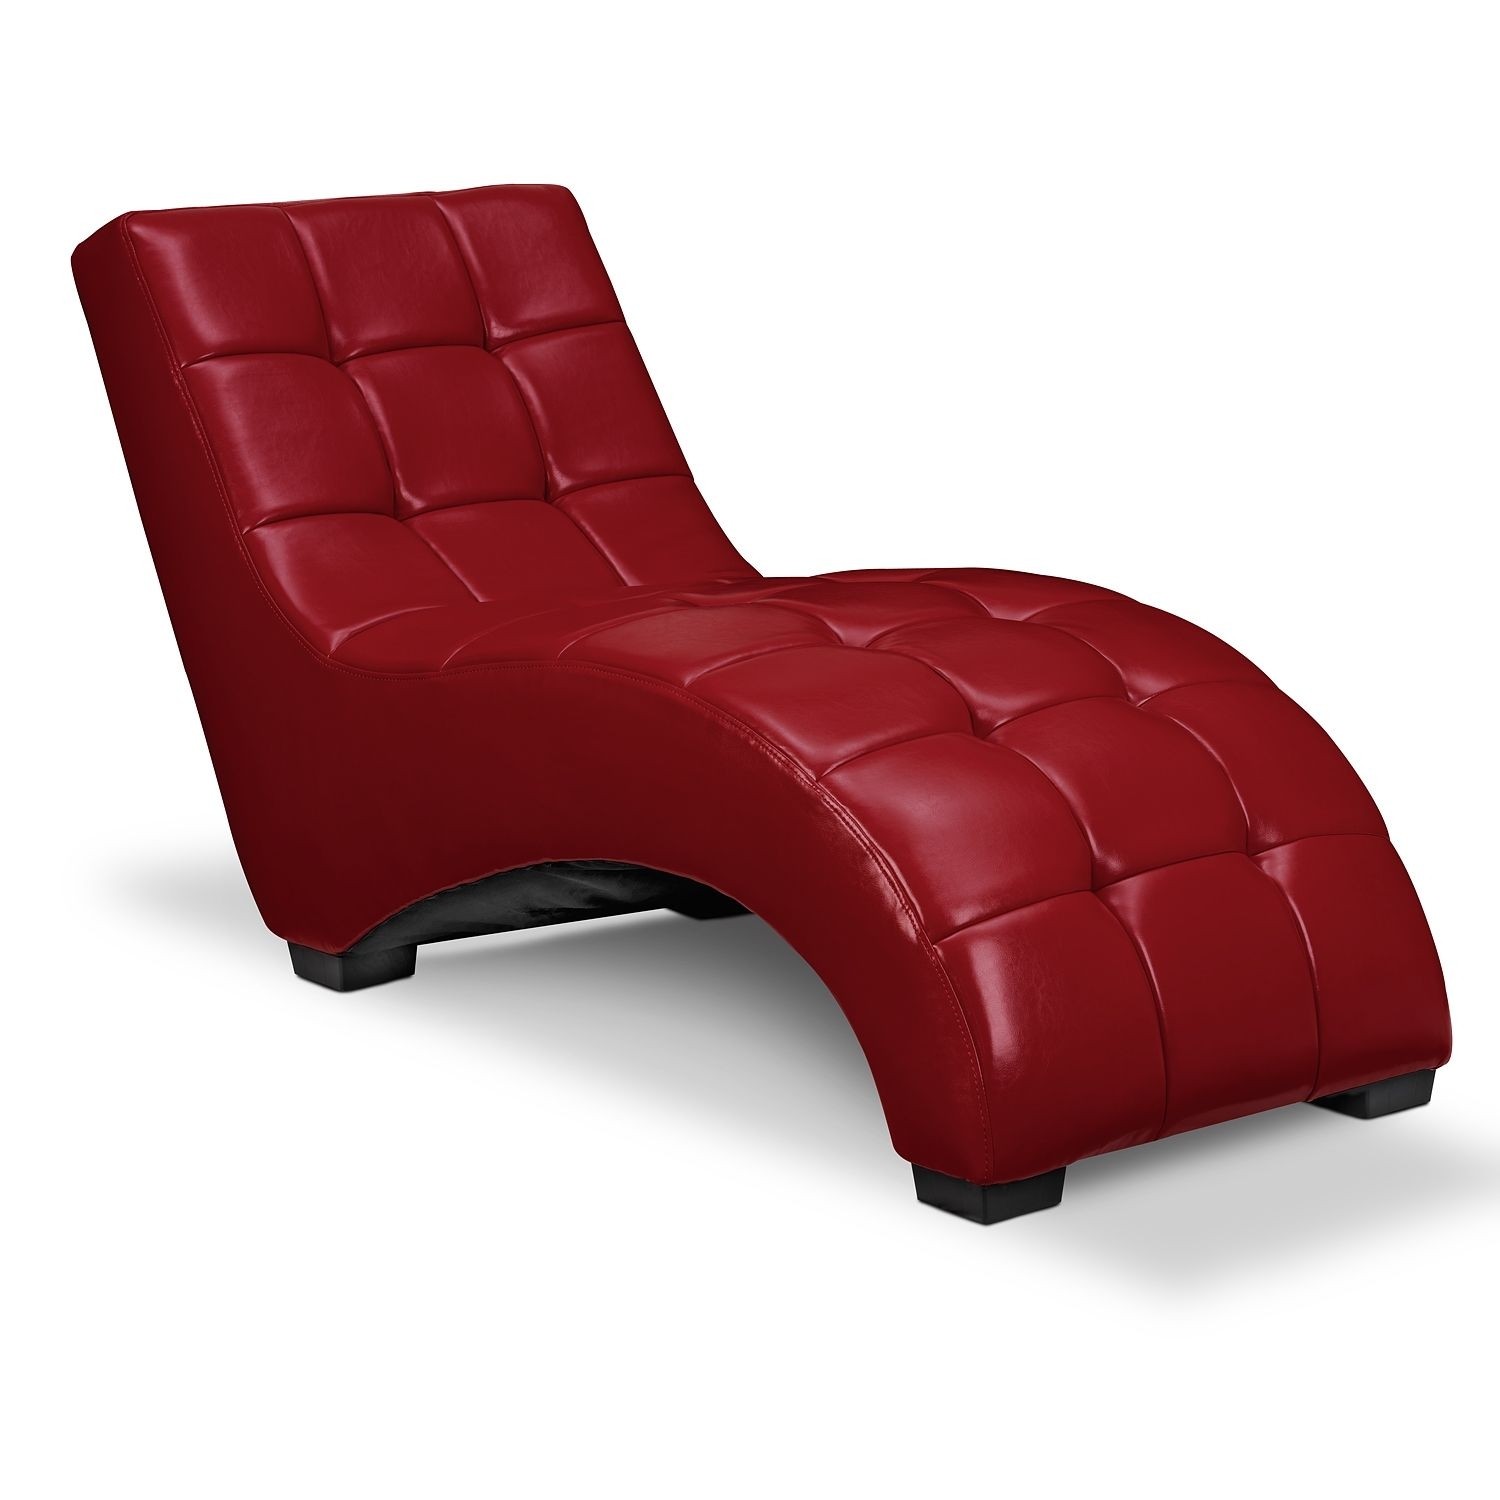 Red chaise lounge indoor home designing 1